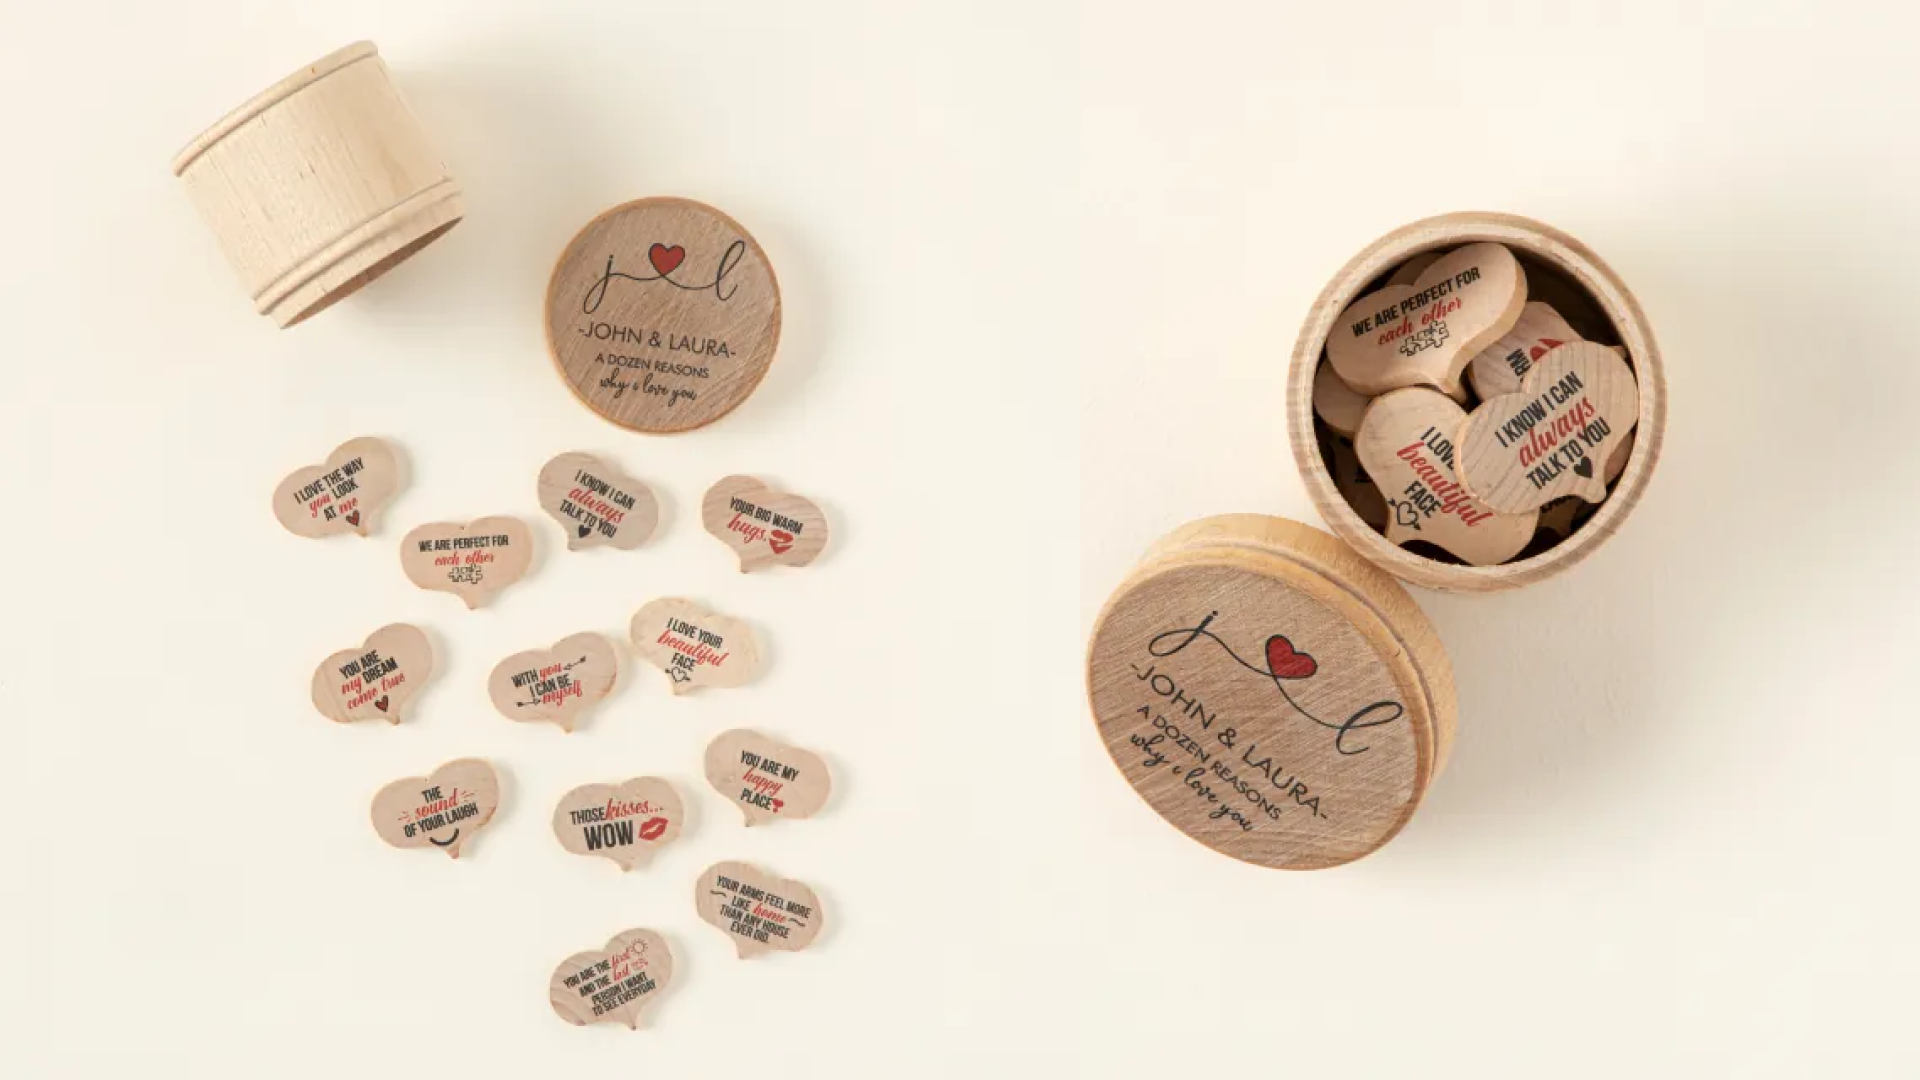 reasons why i love you wooden tokens with a wooden container